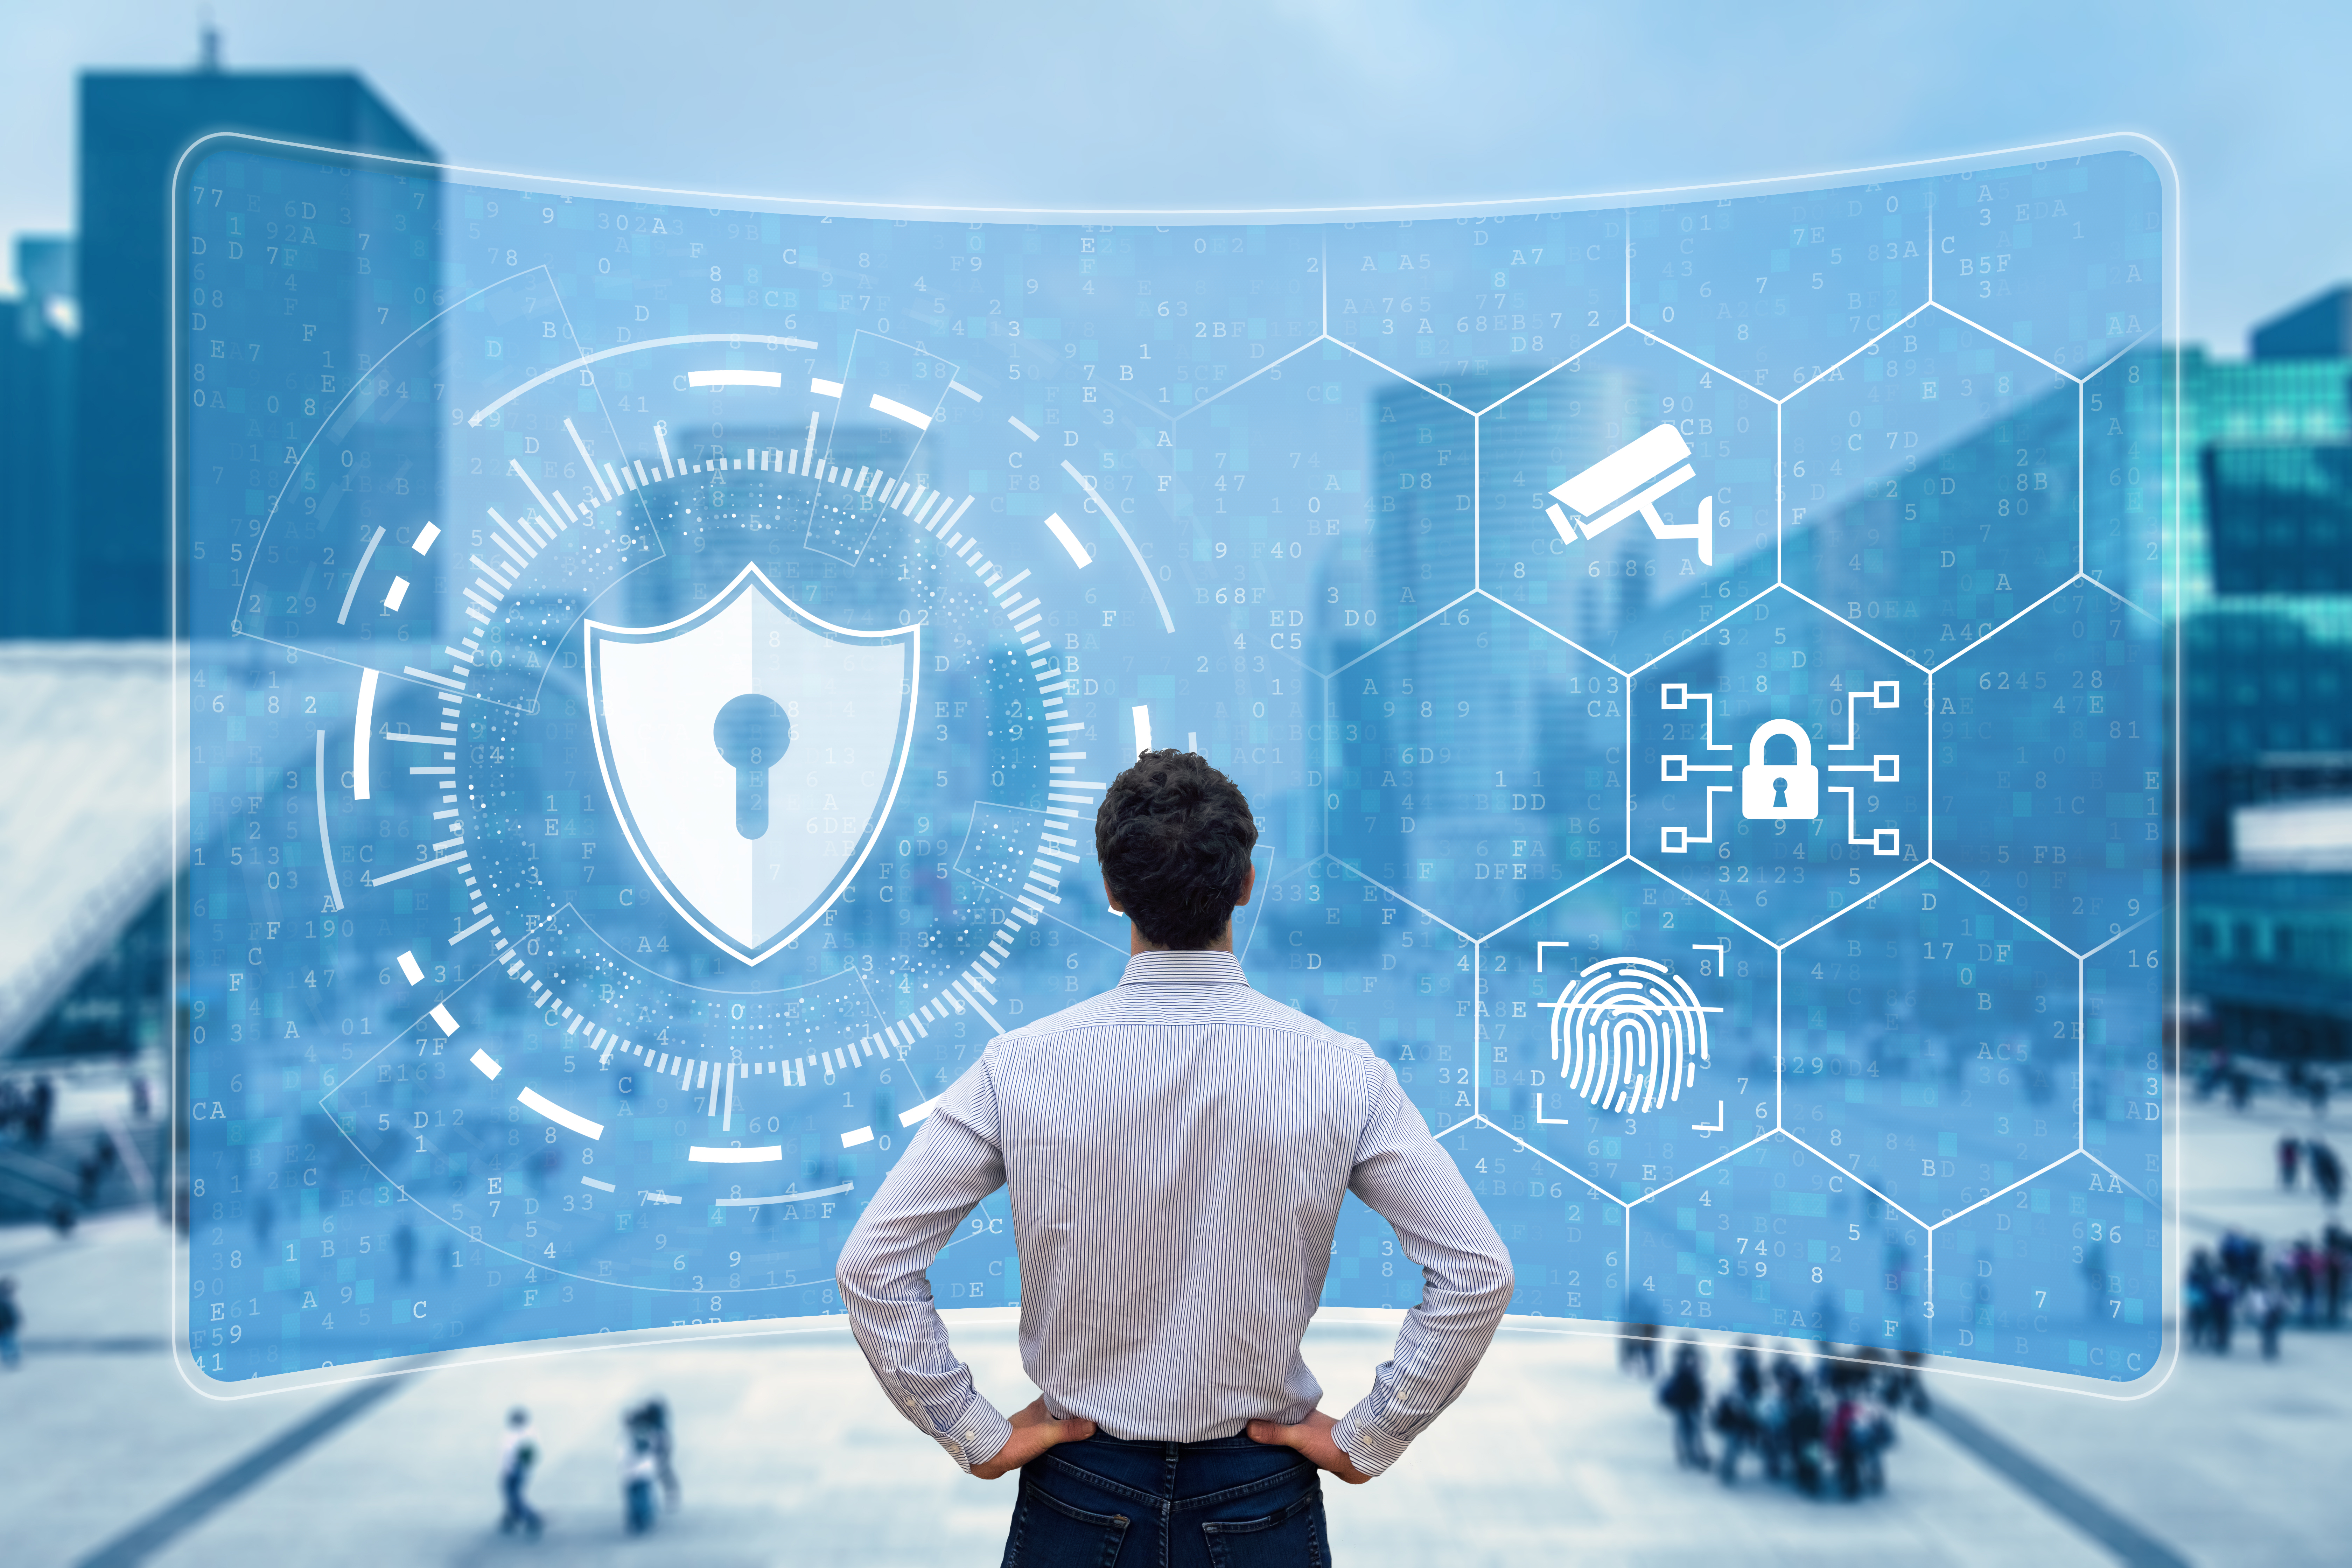 Third Party Services: Cyber Risk and How to Protect Your Organization